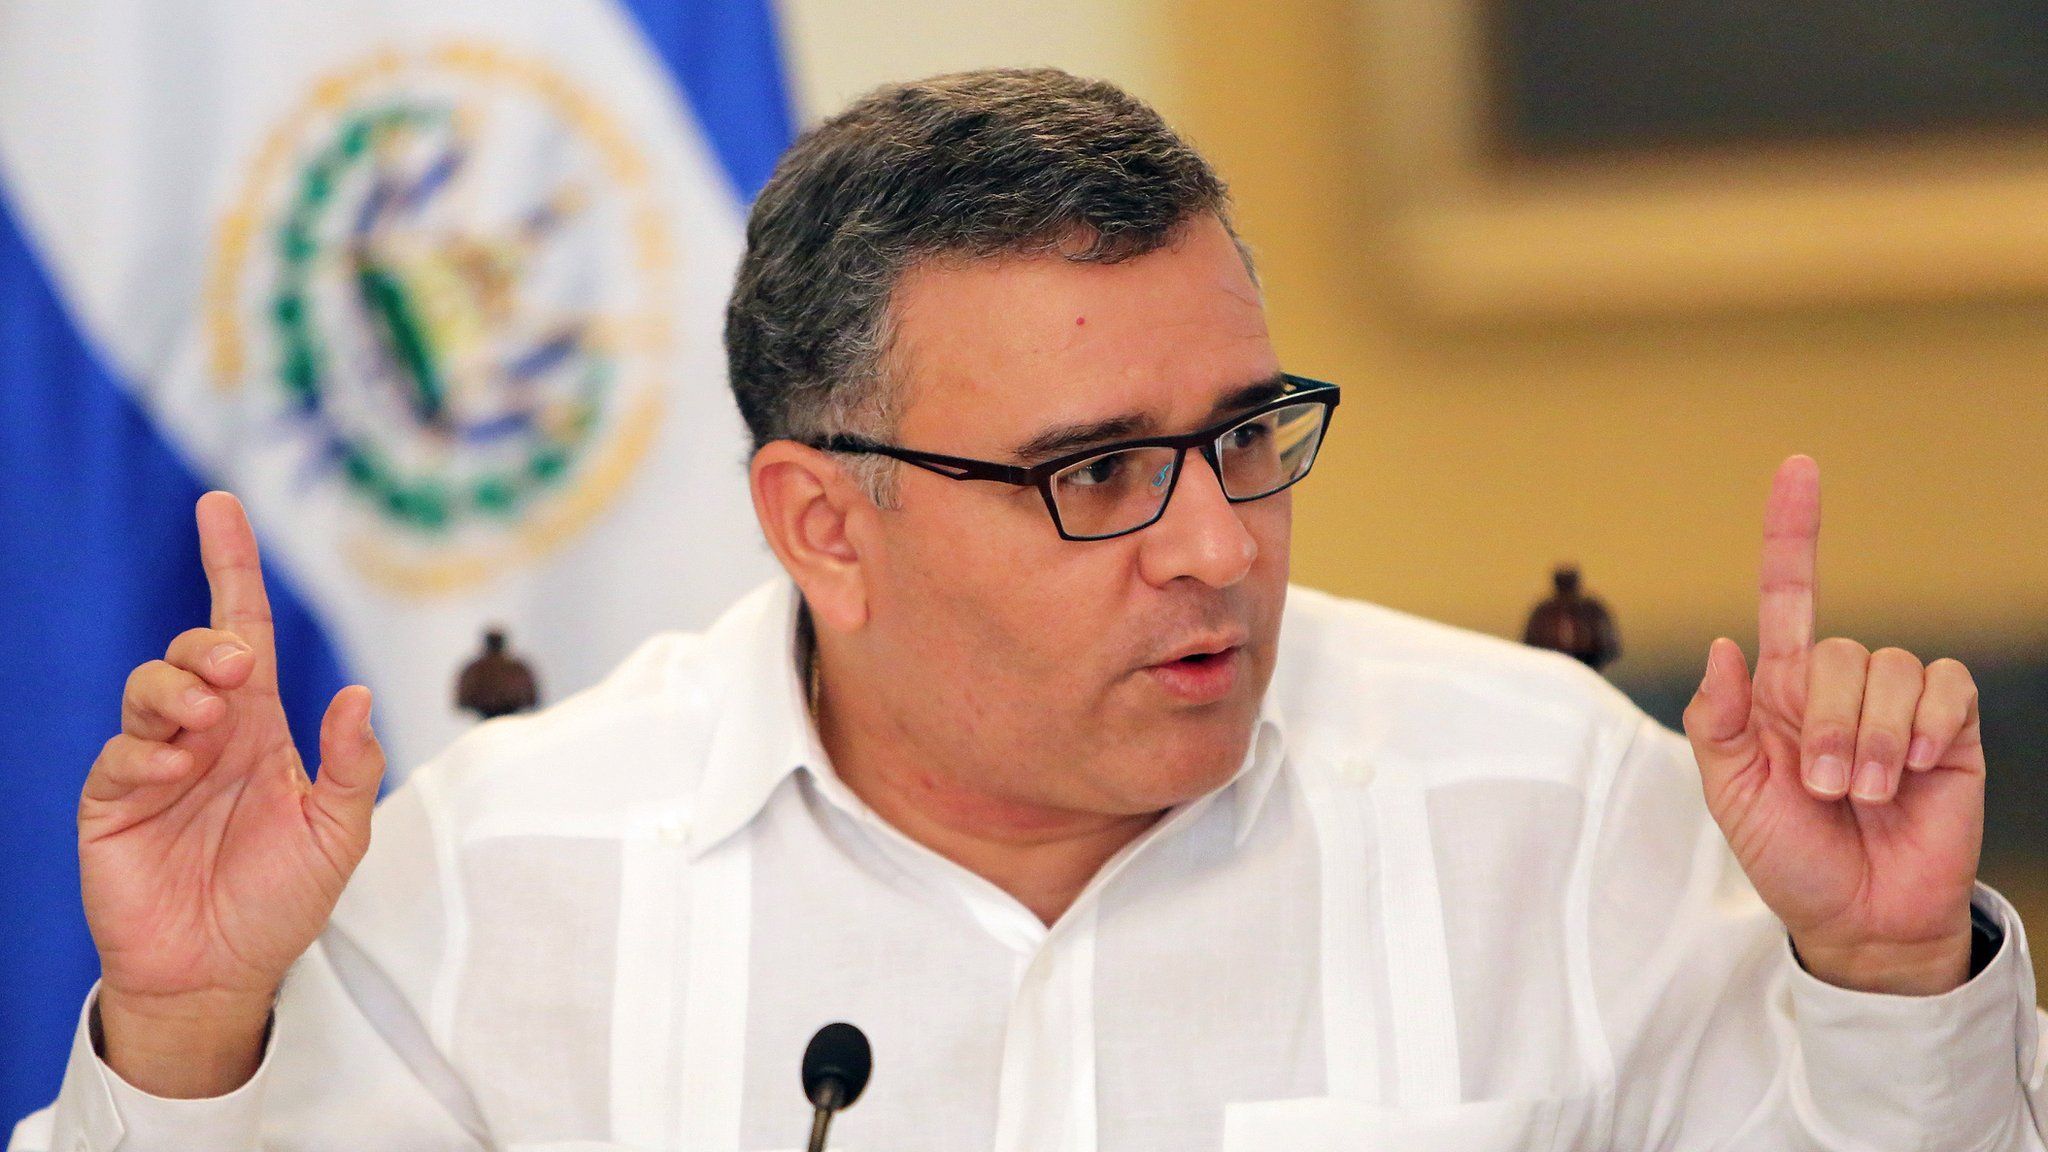 Former President of El Salvador Mauricio Funes, photographed while in office in February 2014.